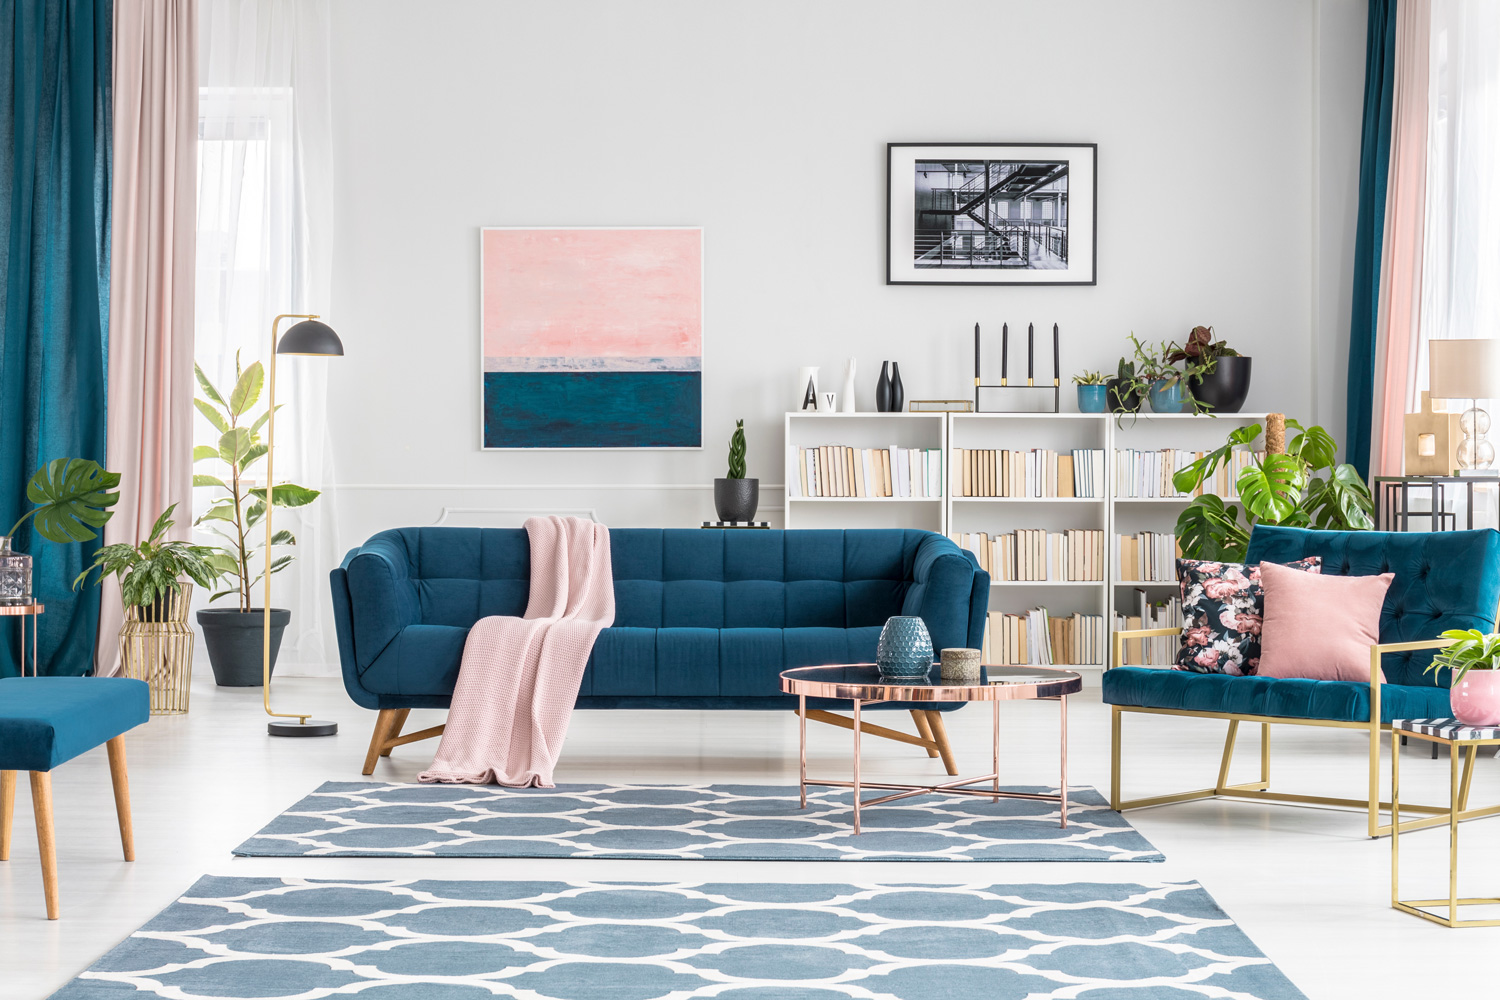 Patterned carpet in luxurious living room interior with blue sofa against white wall with pink painting